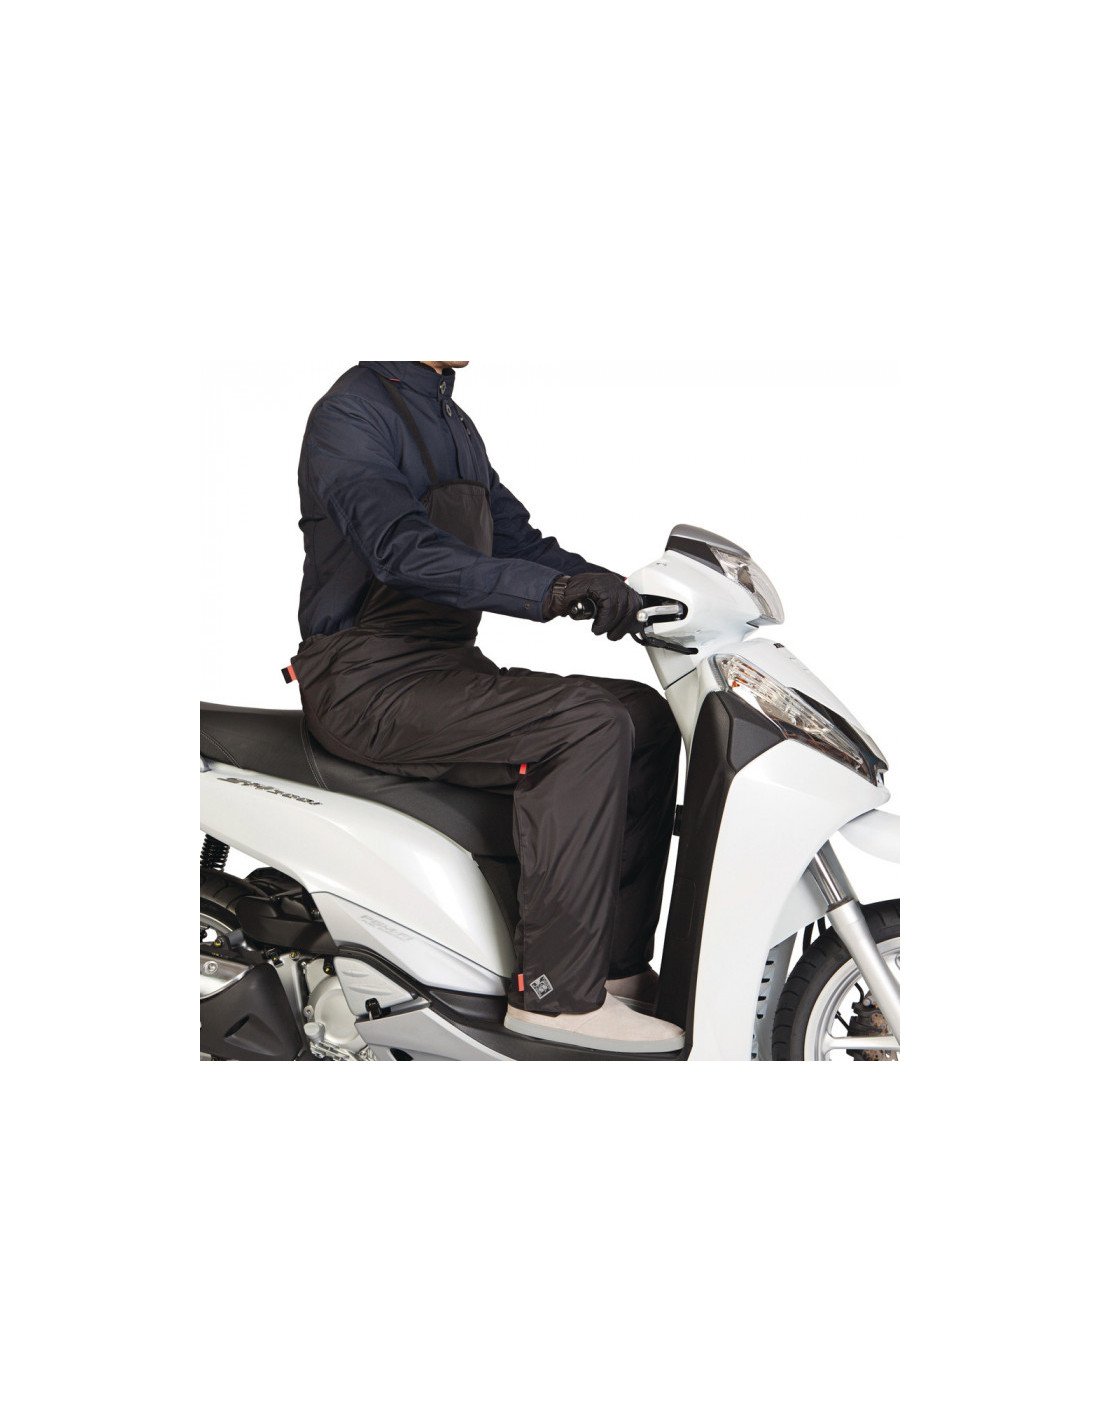 Tablier couvre-jambe pour Maxi Scooter - Tucano Urbano - Tabliers